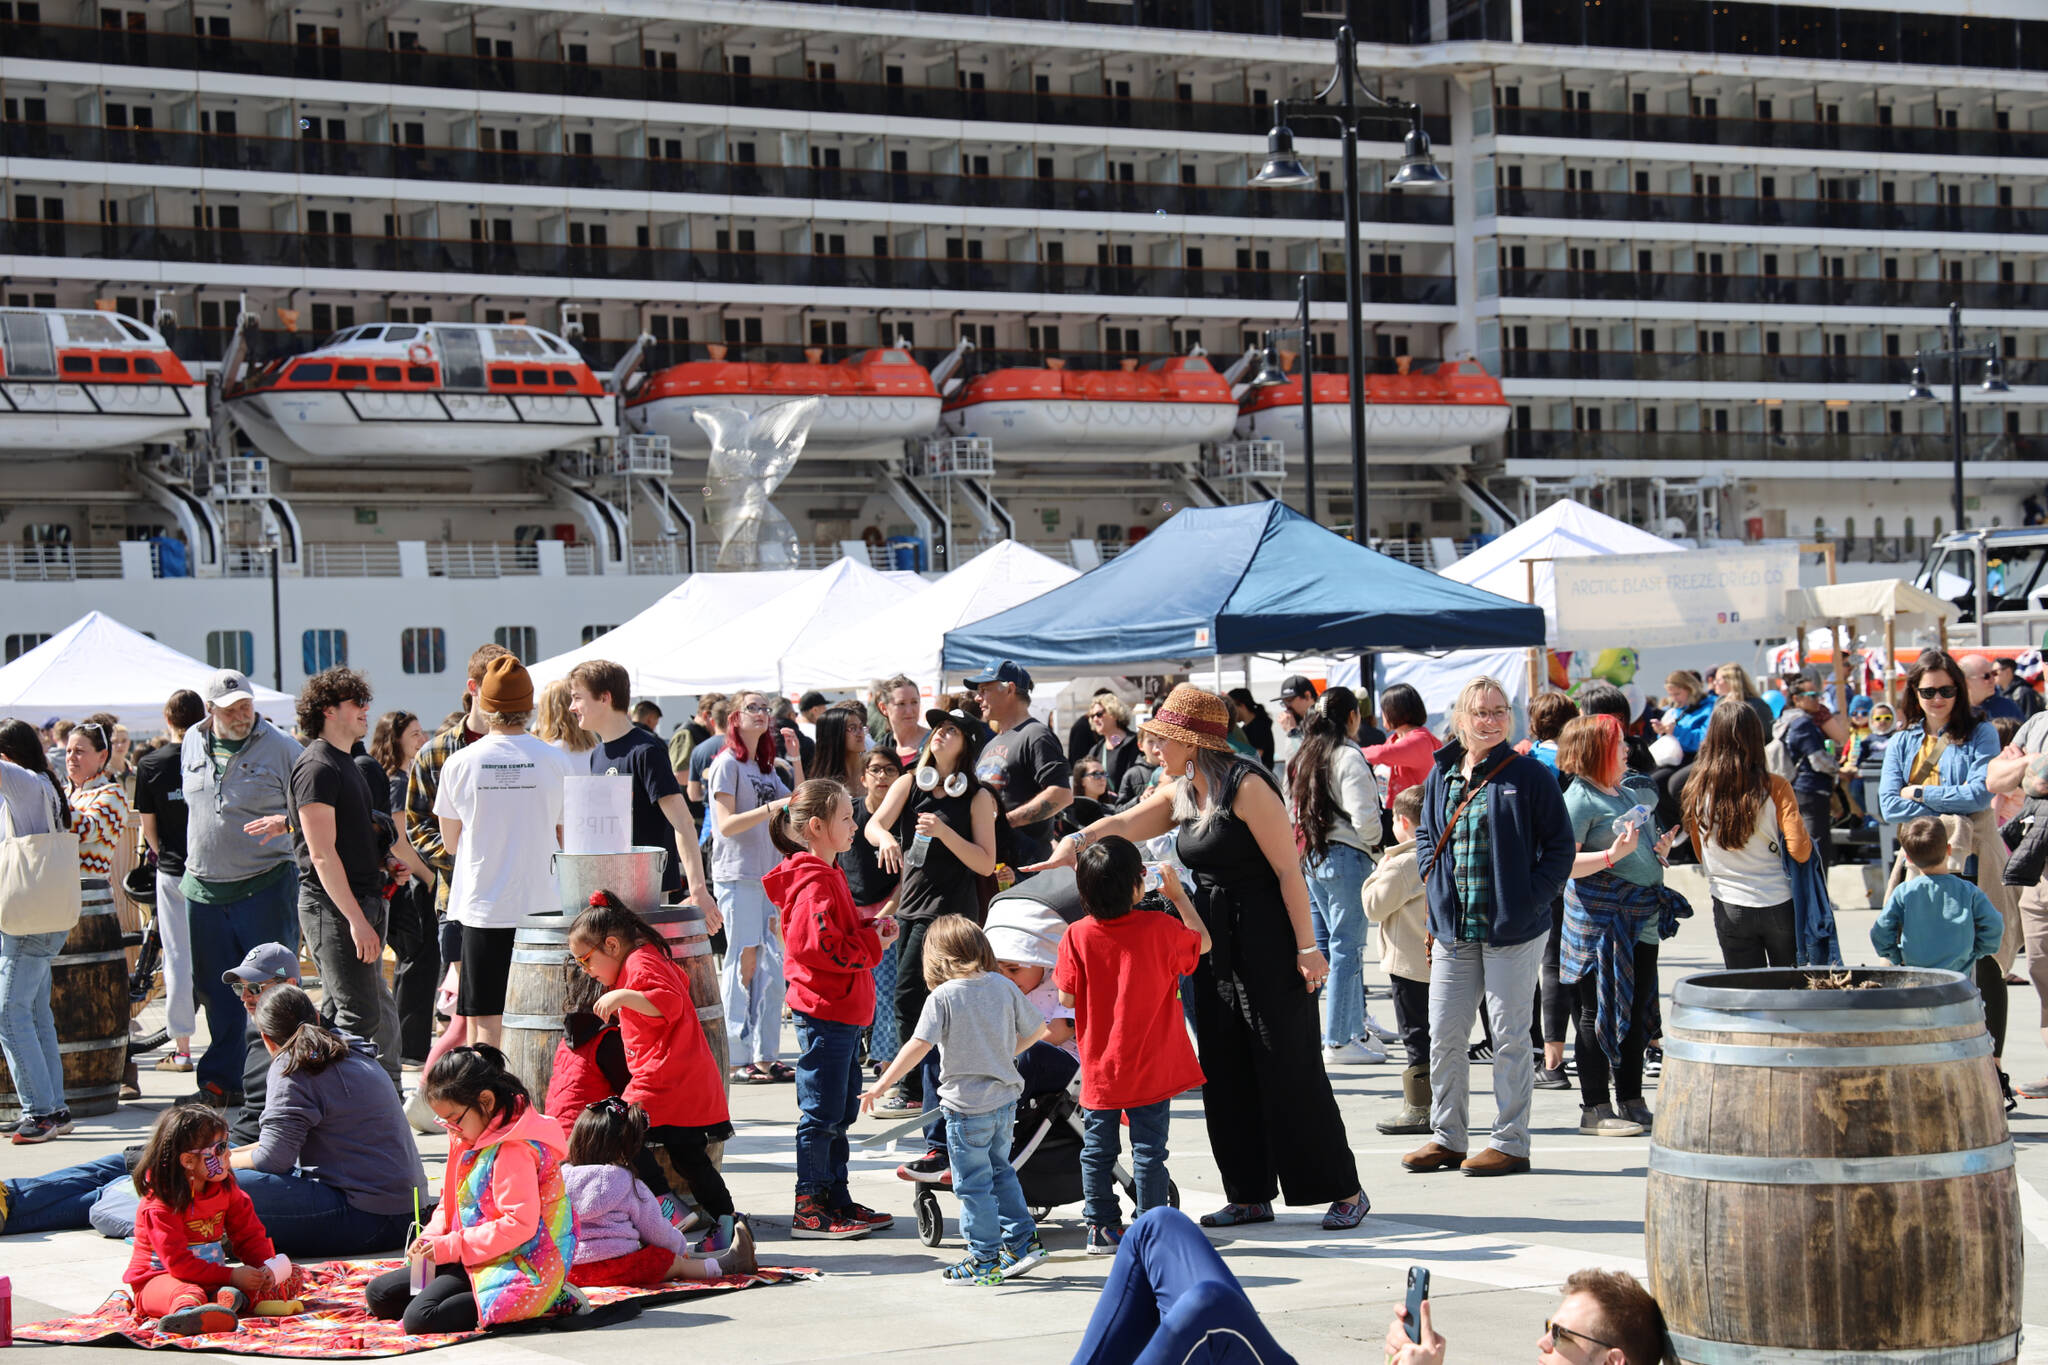 Hundreds of people gather near the stage during 2023 Juneau Maritime Festival Saturday afternoon at the Elizabeth Peratrovich Plaza. The event featured multiple musical performances by local bands and singers. (Clarise Larson / Juneau Empire)